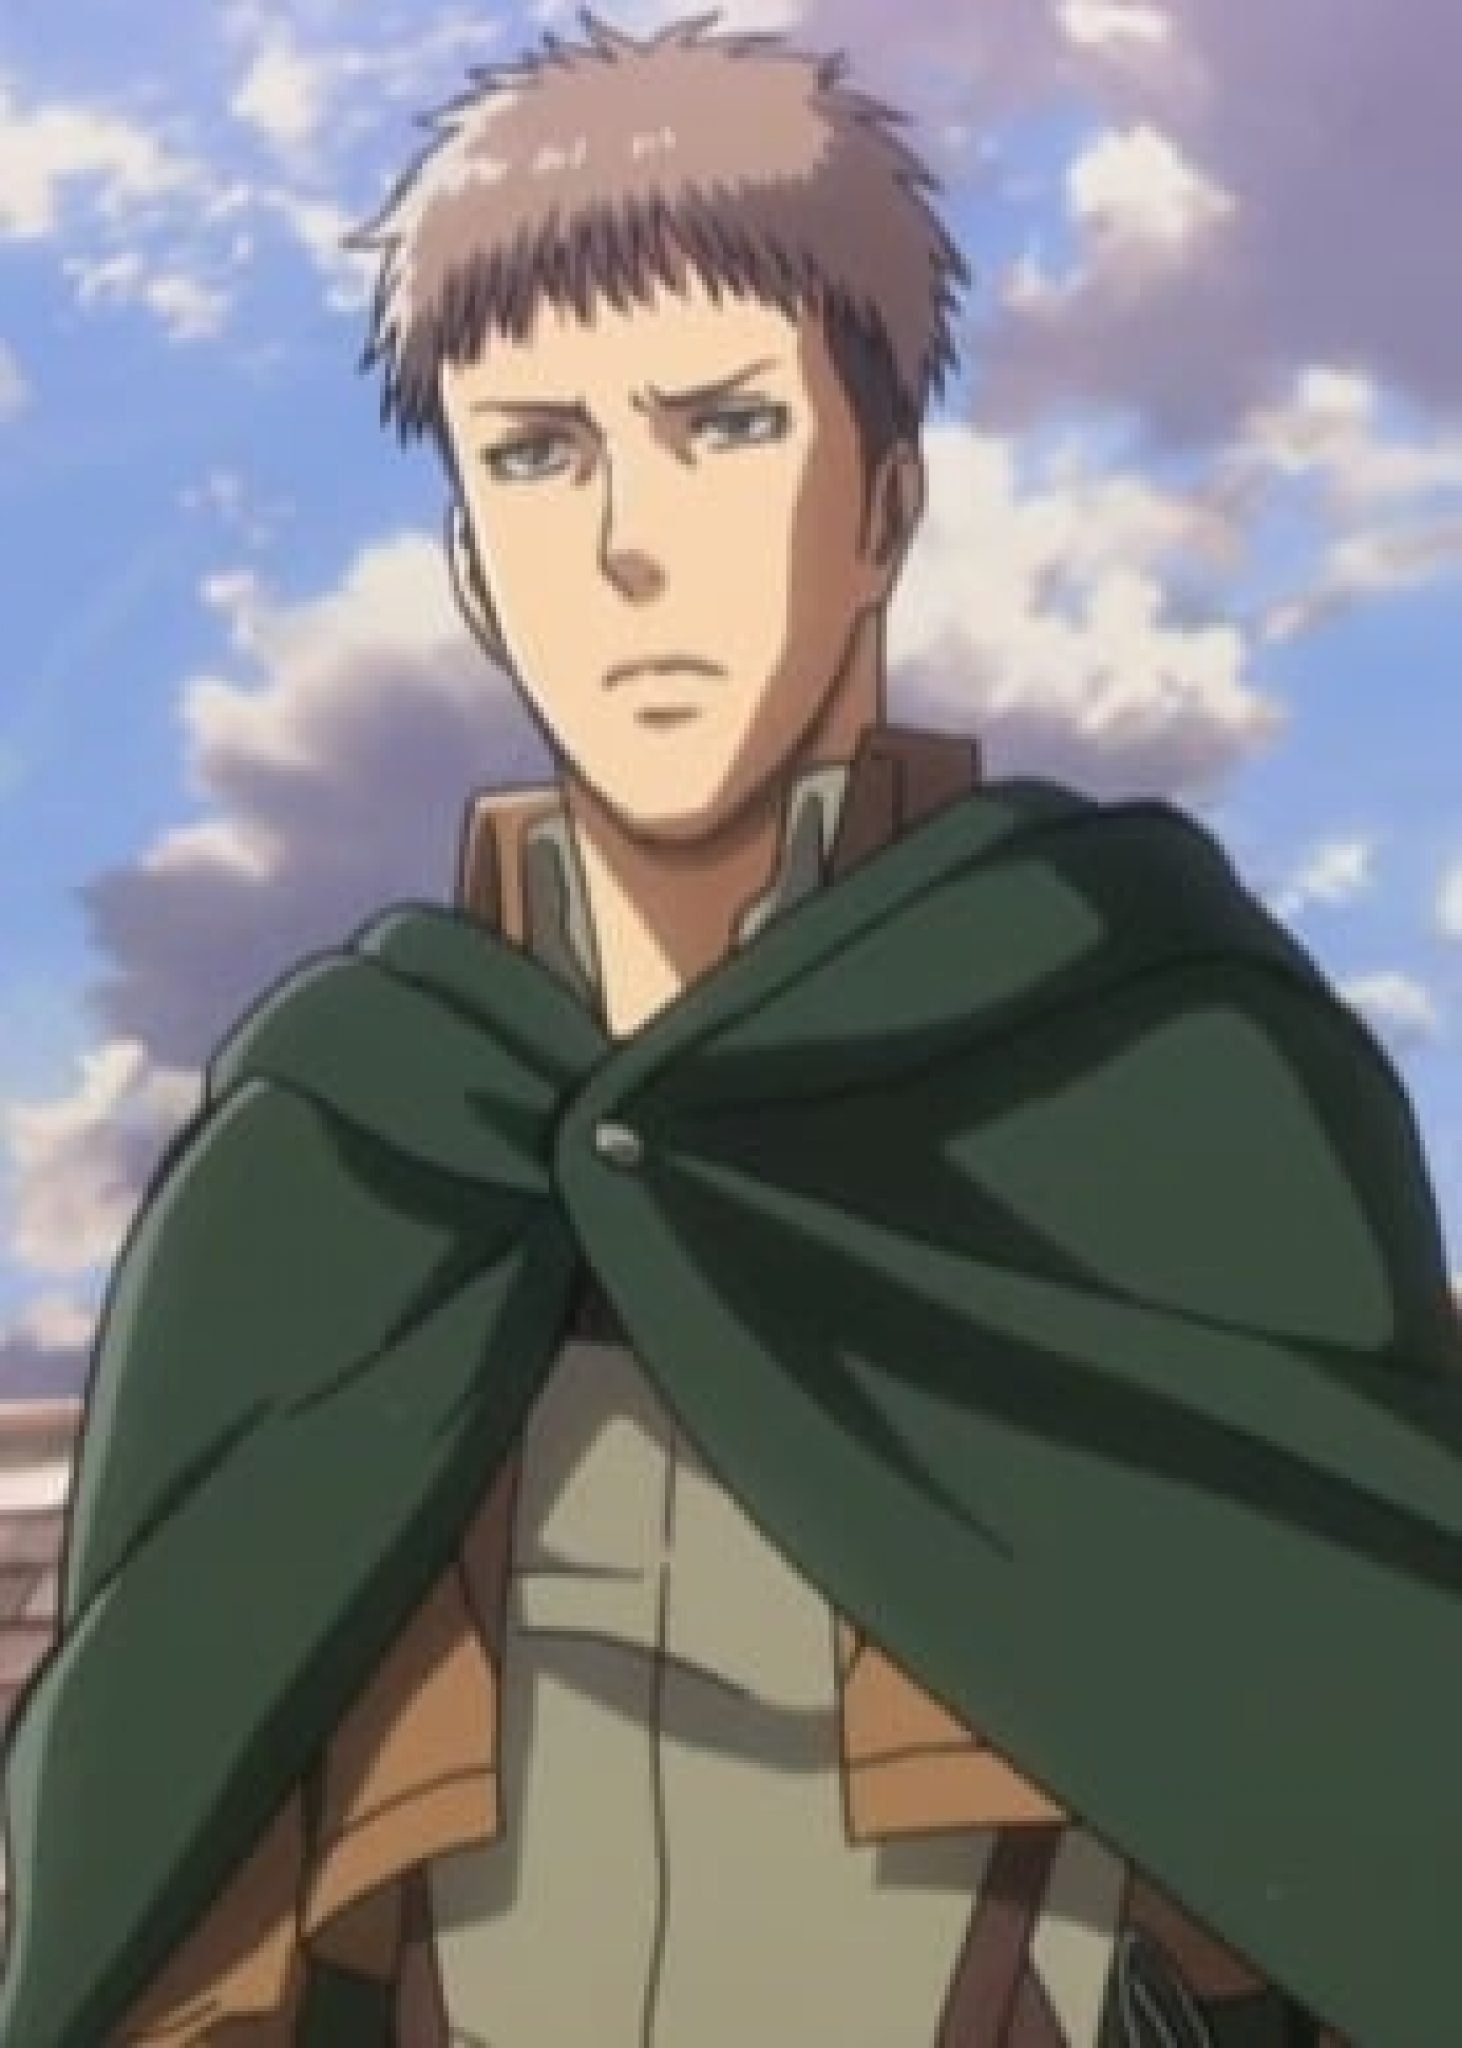 Top 5 Famous Quotes Of Jean Kirstein From Anime Attack On Titan Anime